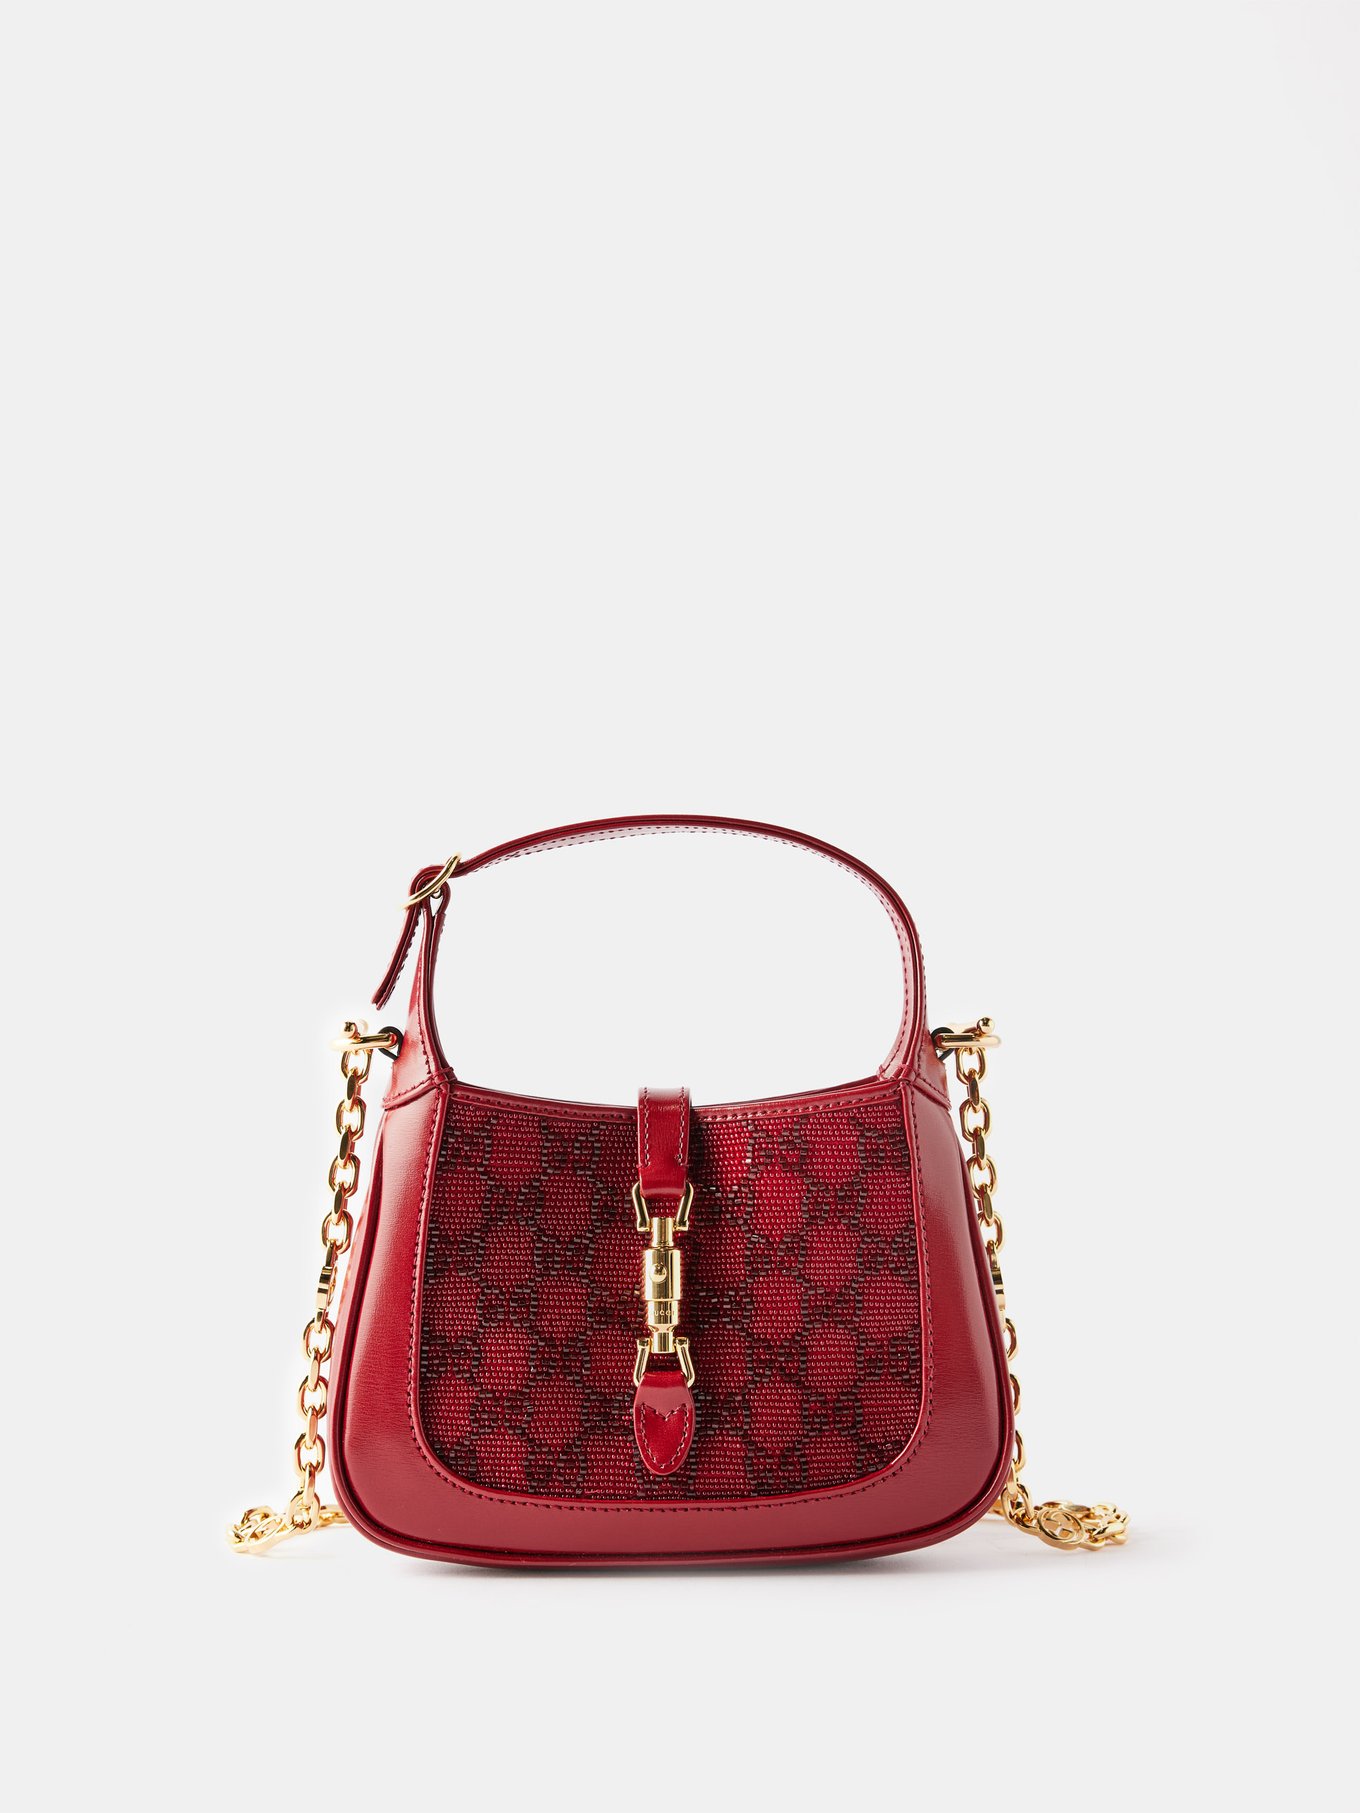 Jackie 1961 small beaded leather shoulder bag | Gucci